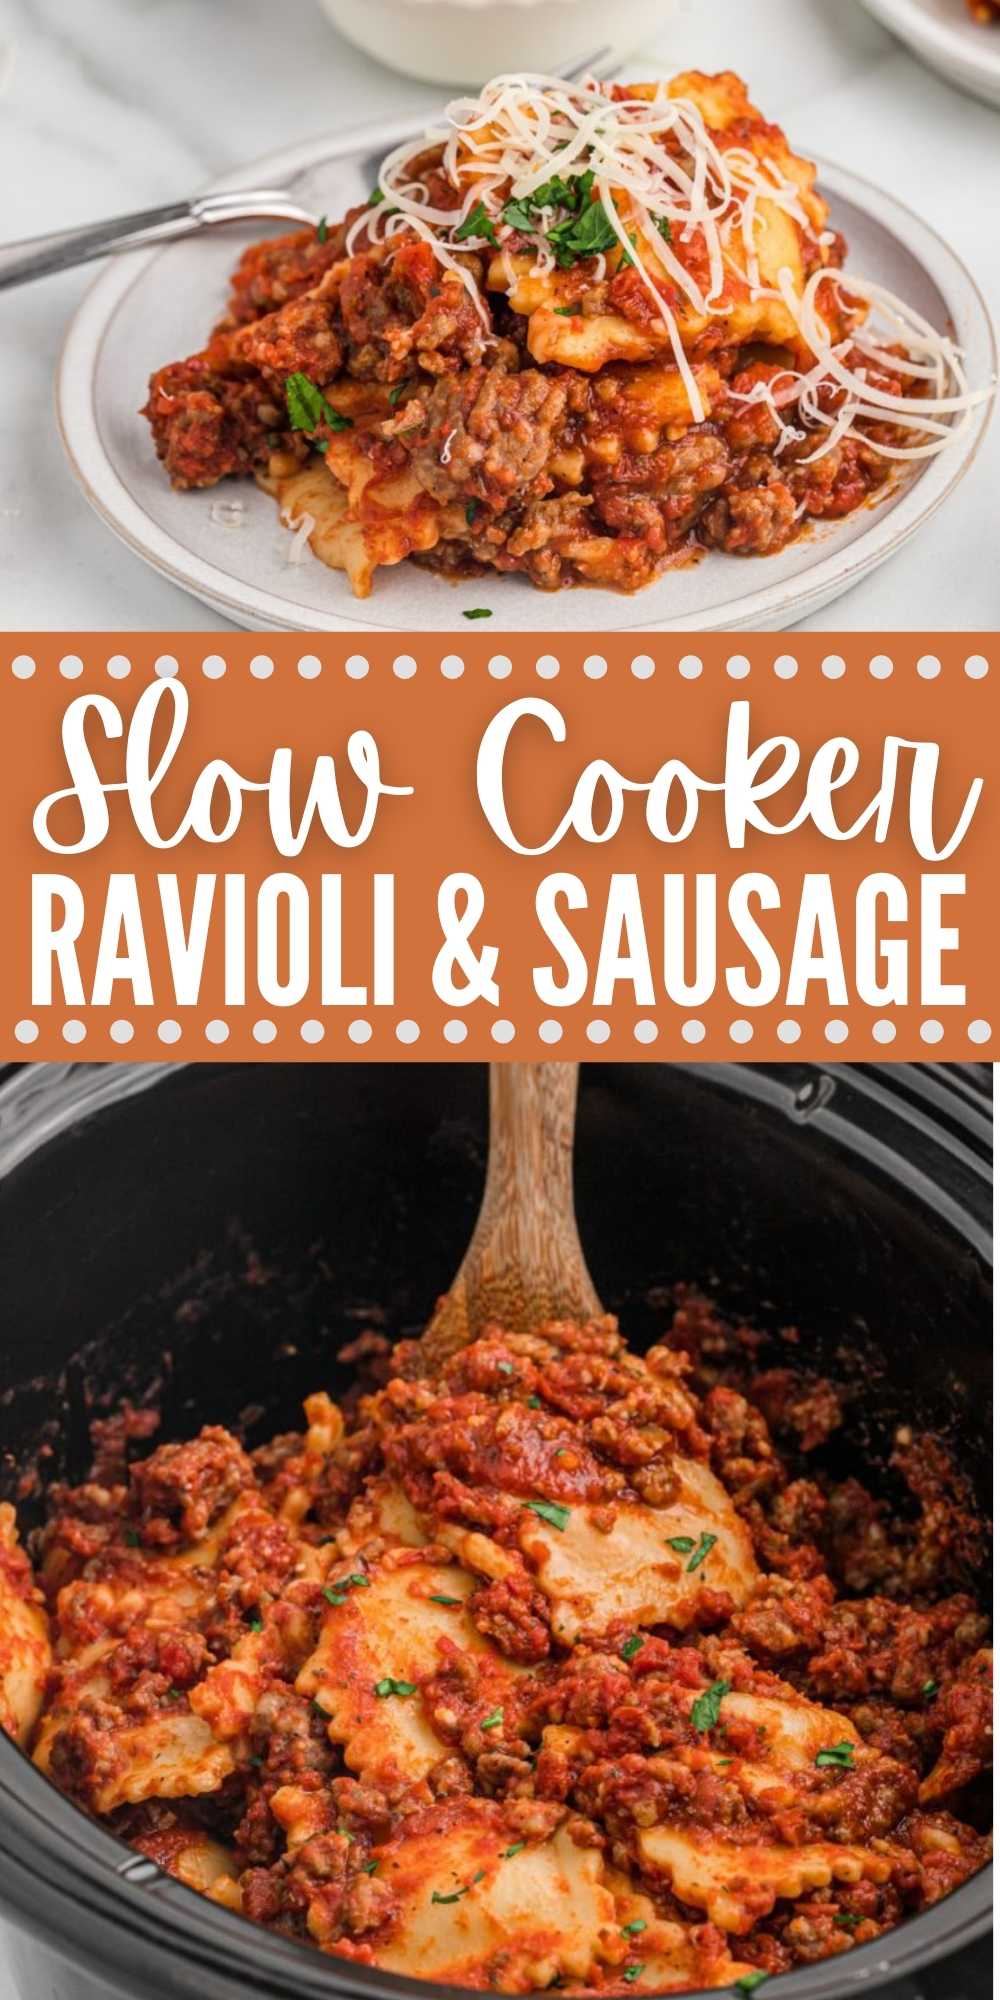 Crockpot Ravioli and Sausage is a one pot meal layered with cheesy ravioli, sausage and the tomato sauce. Try this meal for busy weeknights. Easy ingredients makes this slow cooker meal so delicious. #eatingonadime #ravioliandsausage #slowcookerrecipes